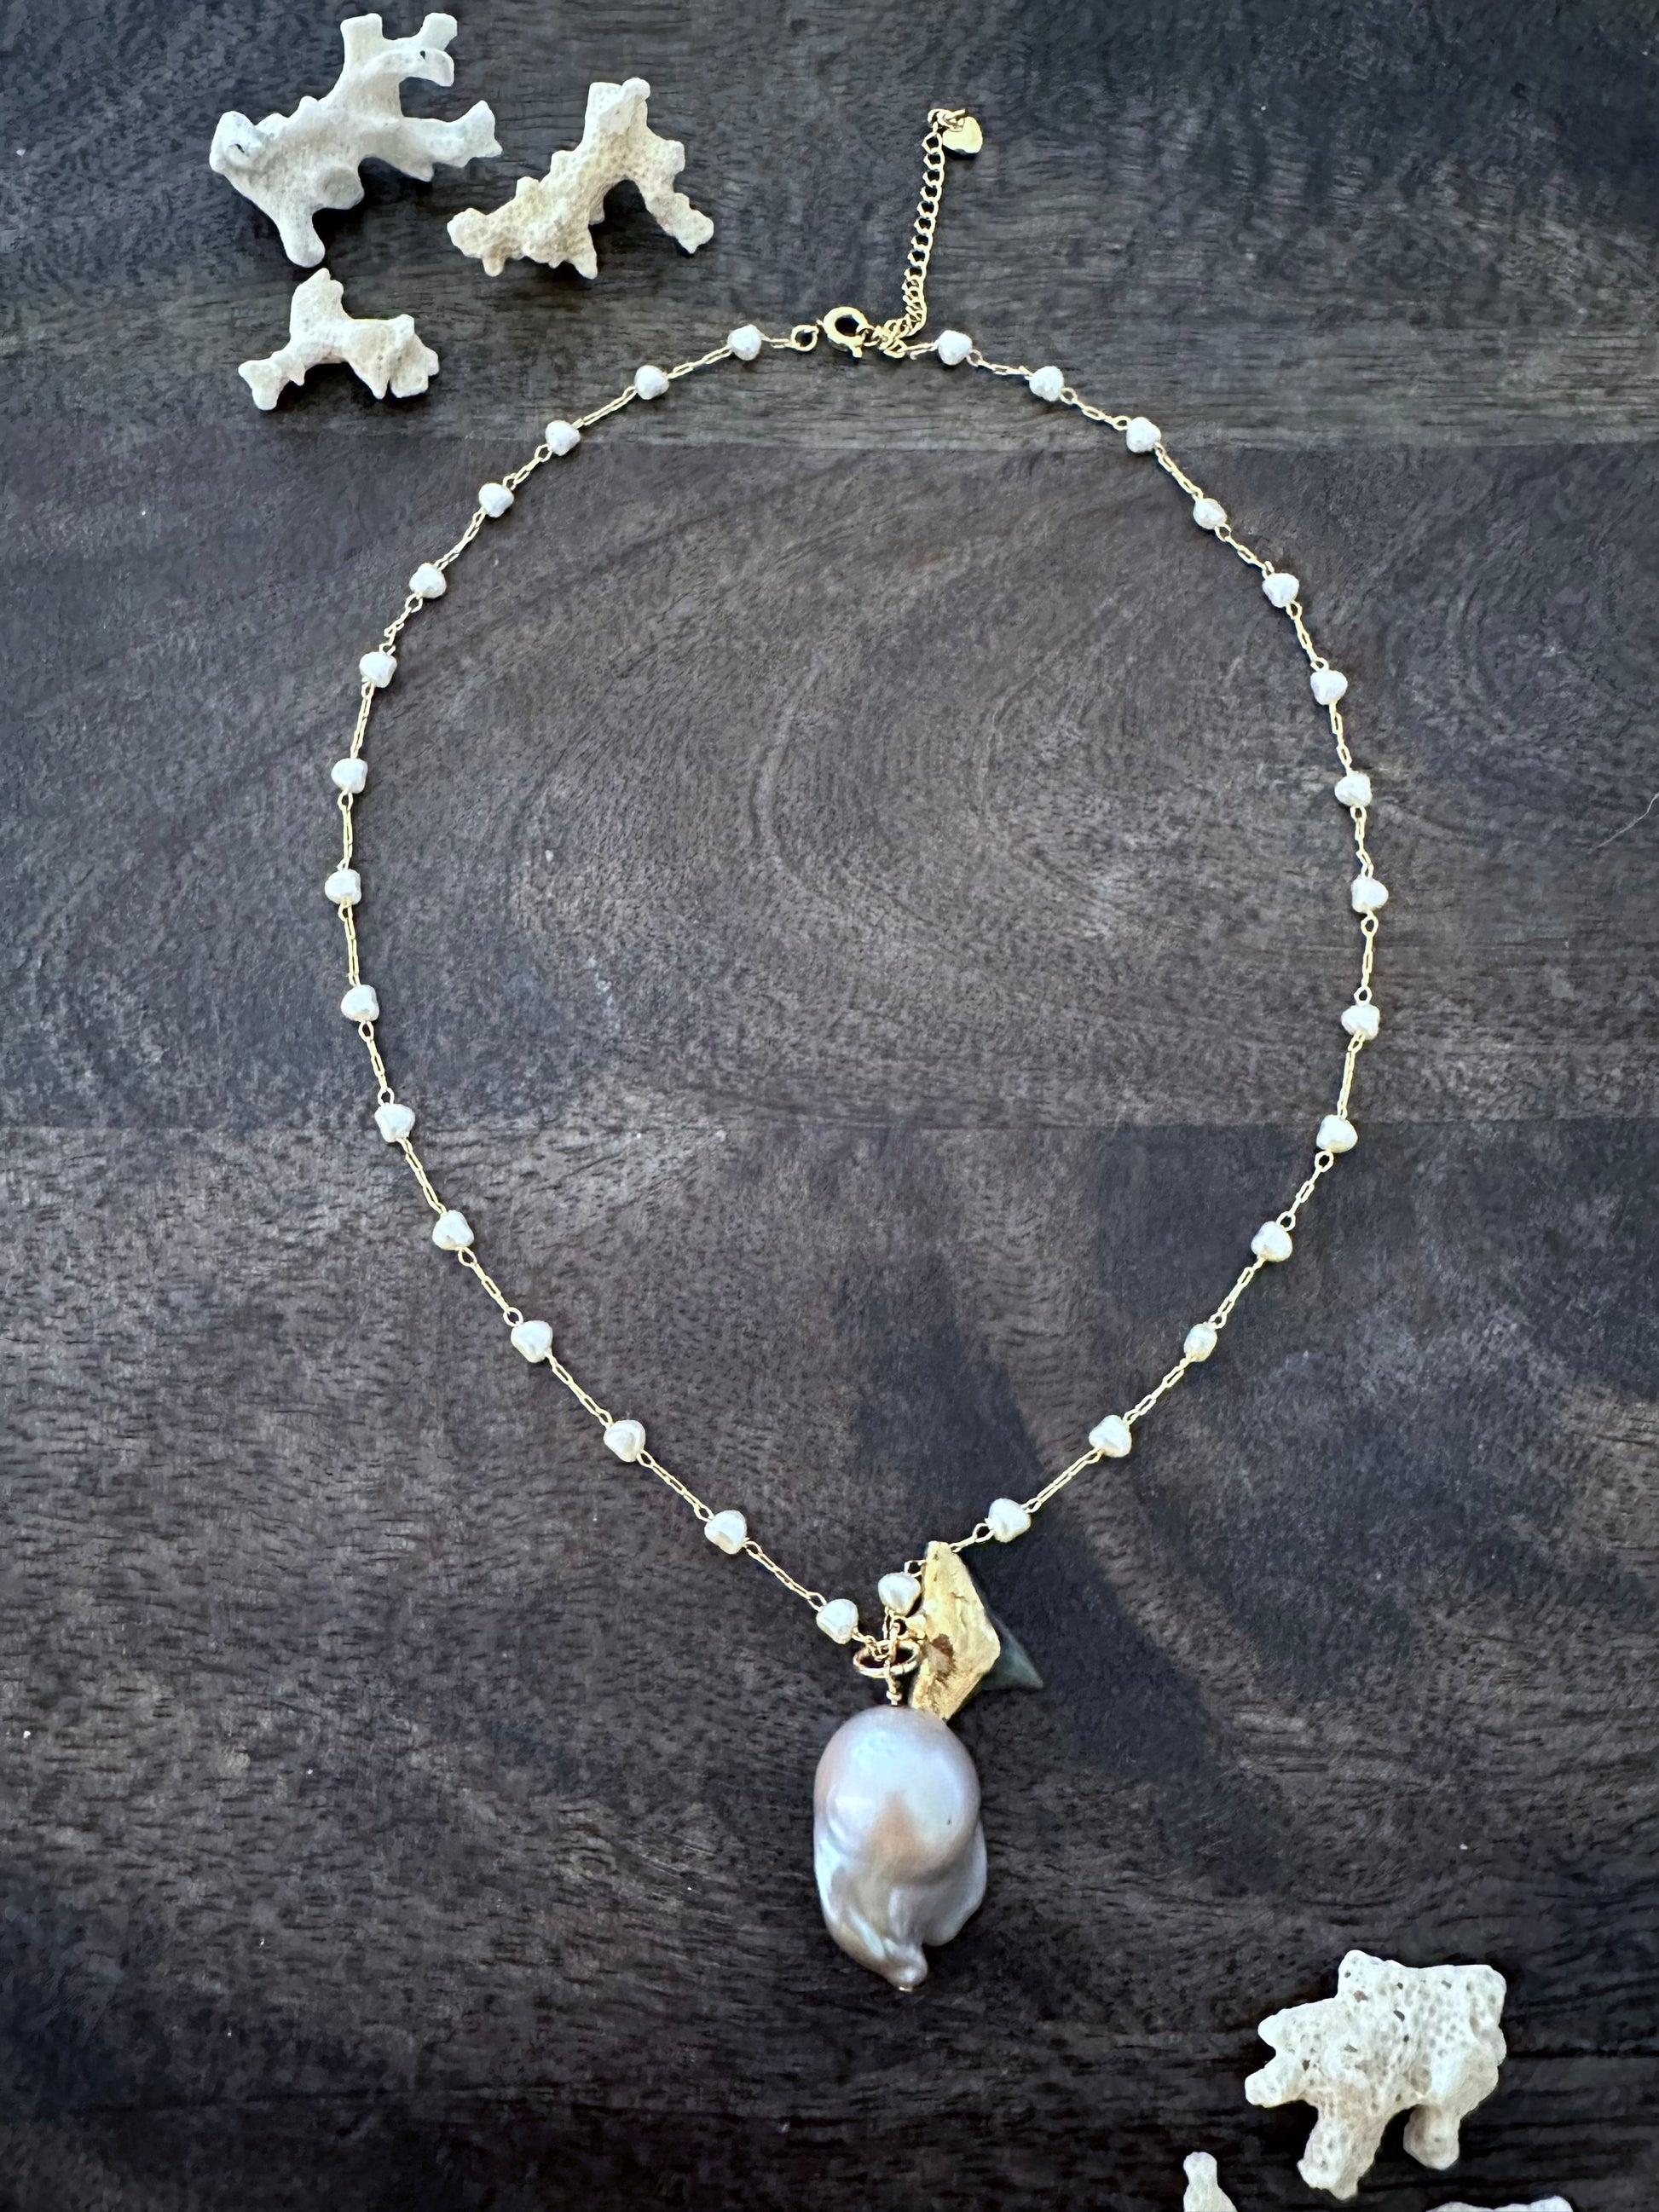 a white pearl necklace with a large grey oddly shaped pearl and a gold vermeil black sharks tooth on a grey wooden background. there are white coral pieces in the upper left andlower right corner